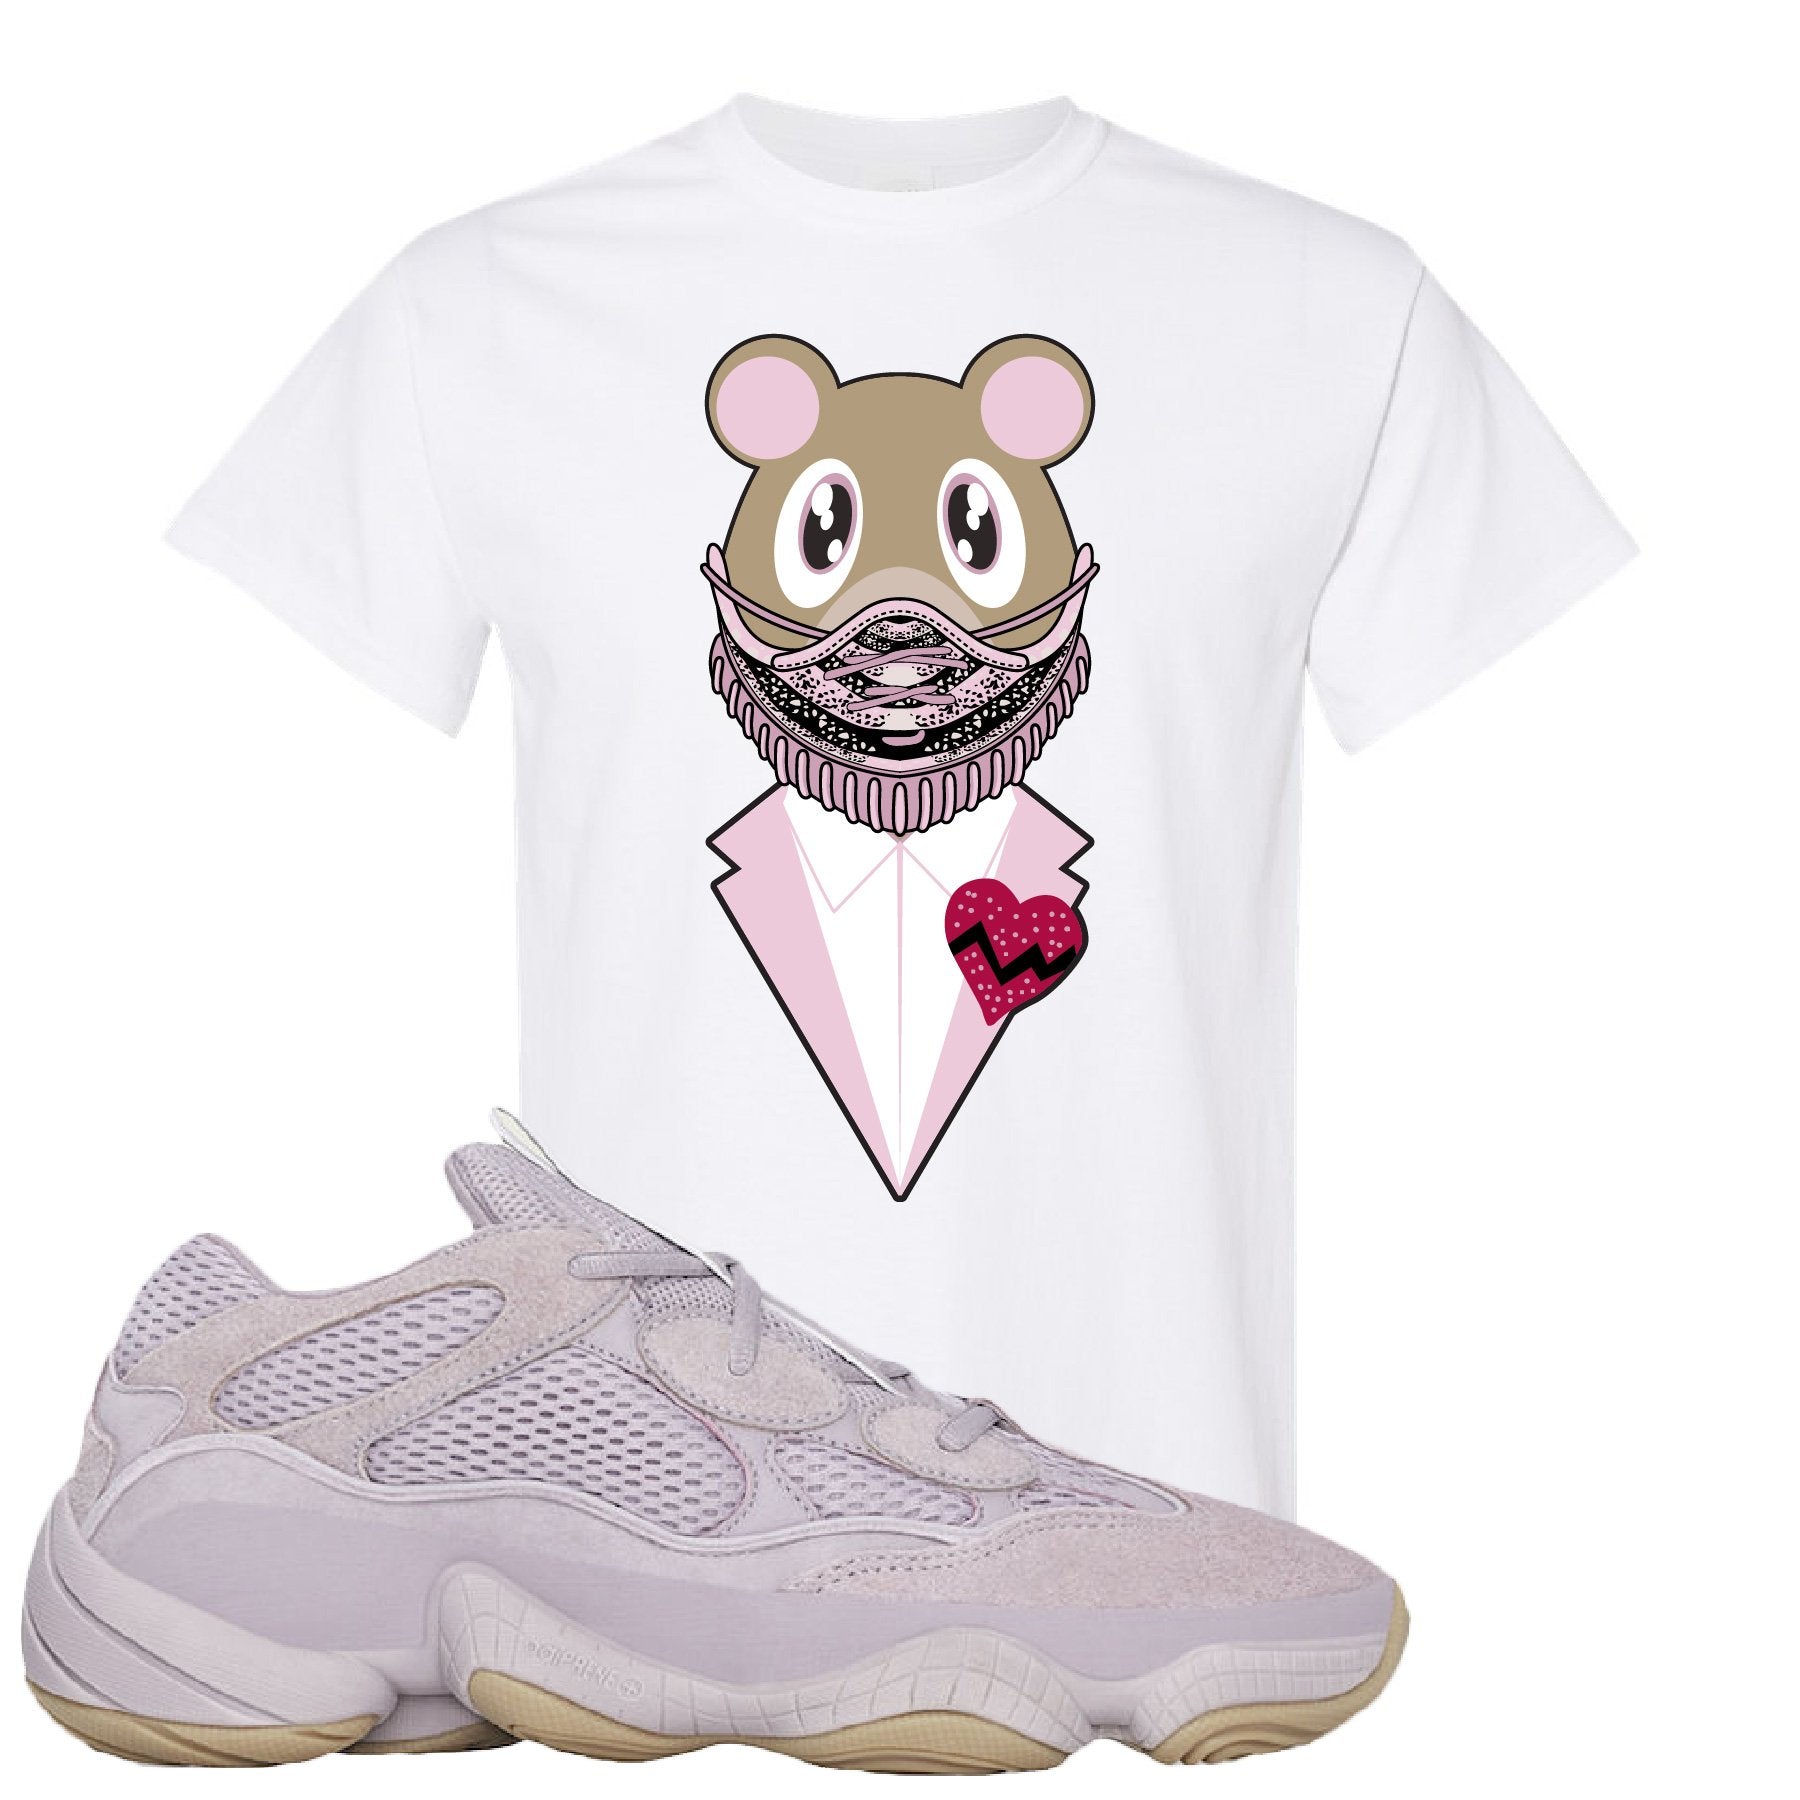 Yeezy 500 Soft Vision Yeezy Sneaker Mask White Sneaker Hook Up T-Shirt